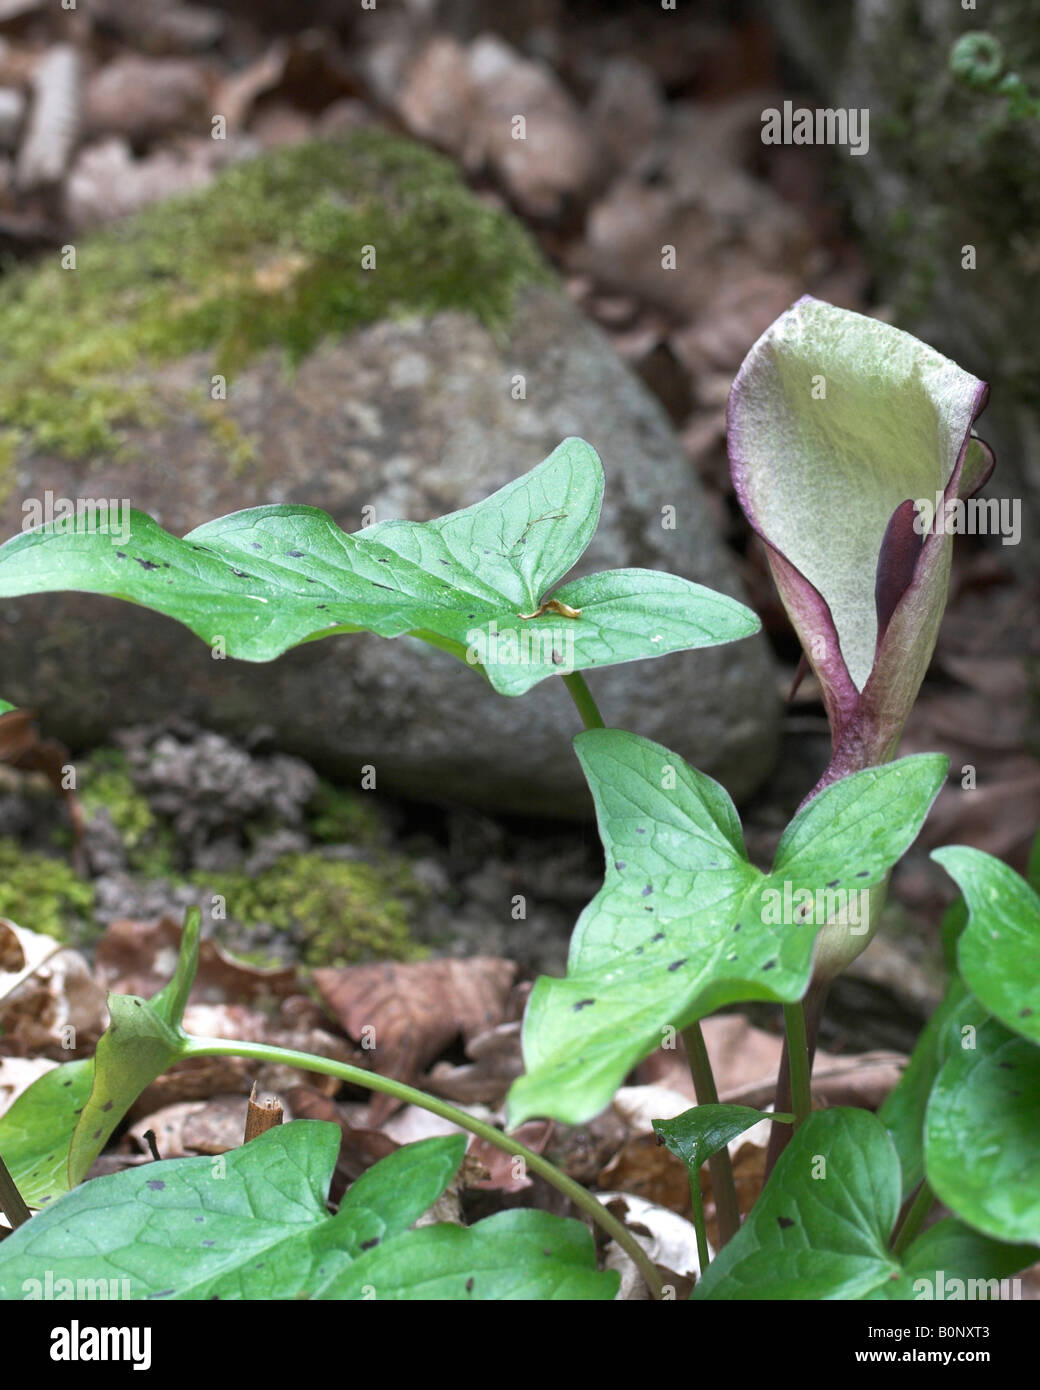 Cuckoo Pint Arum maculatum showing spadix spathe and purple spotted leaves Stock Photo